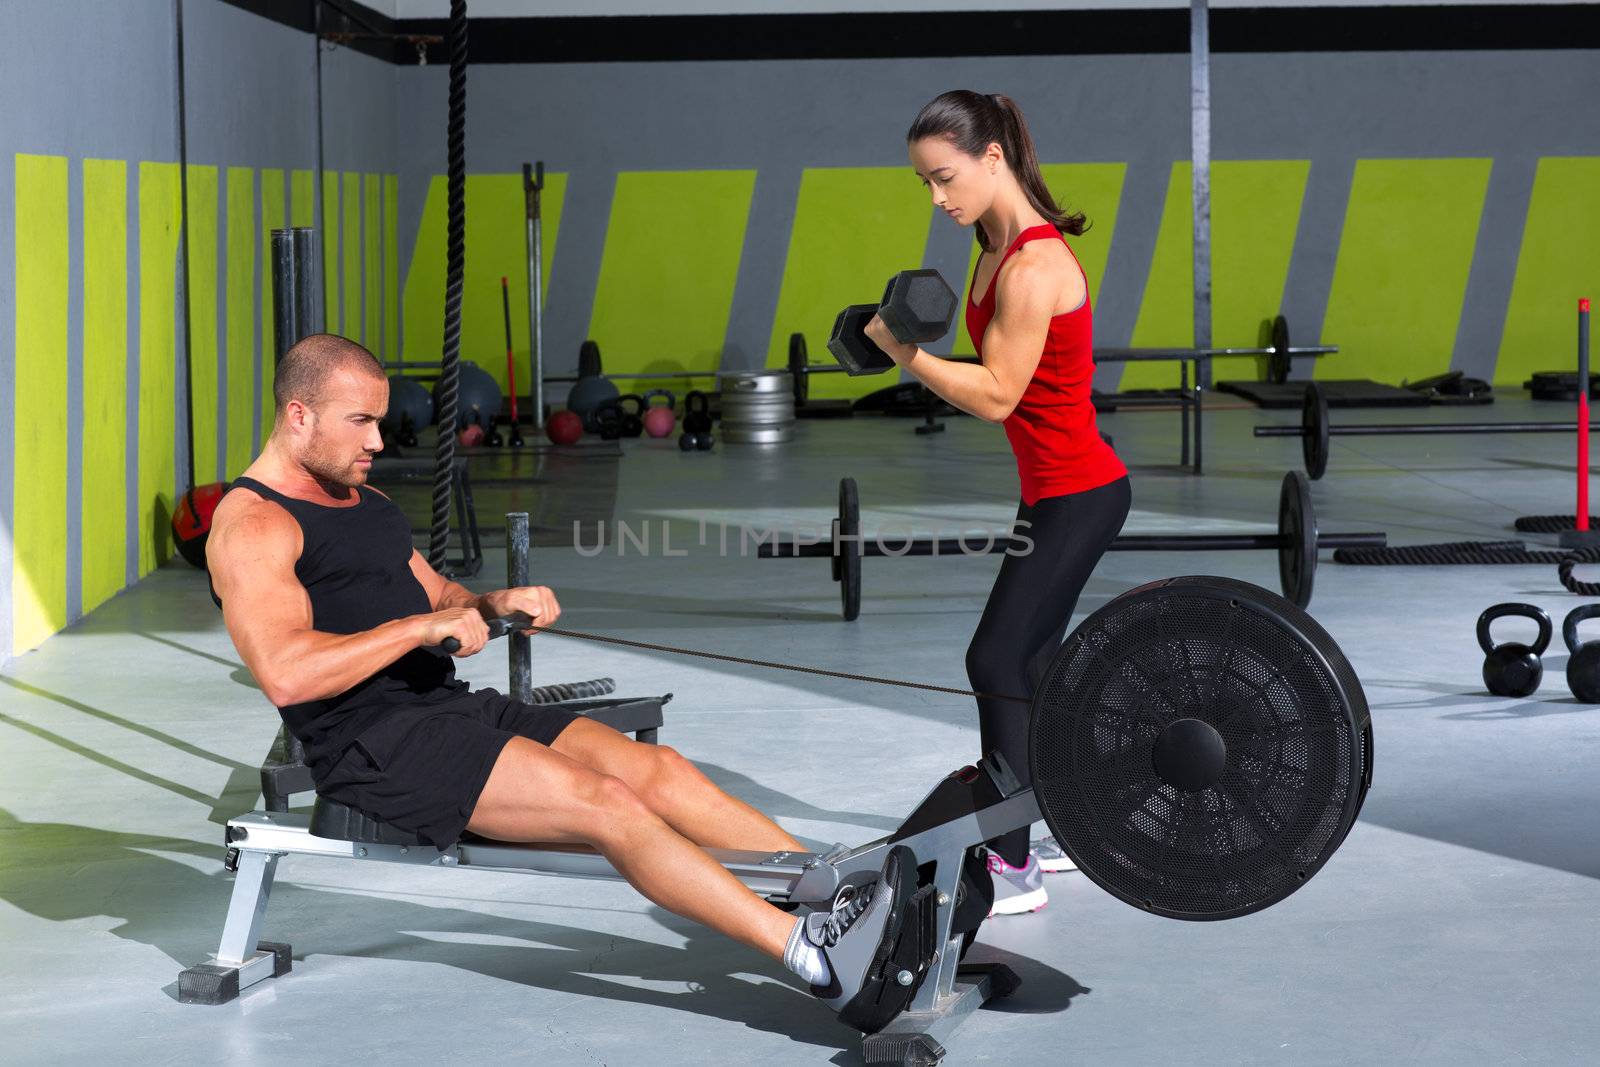 Gym couple with dumbbell weights and fitness rower by lunamarina